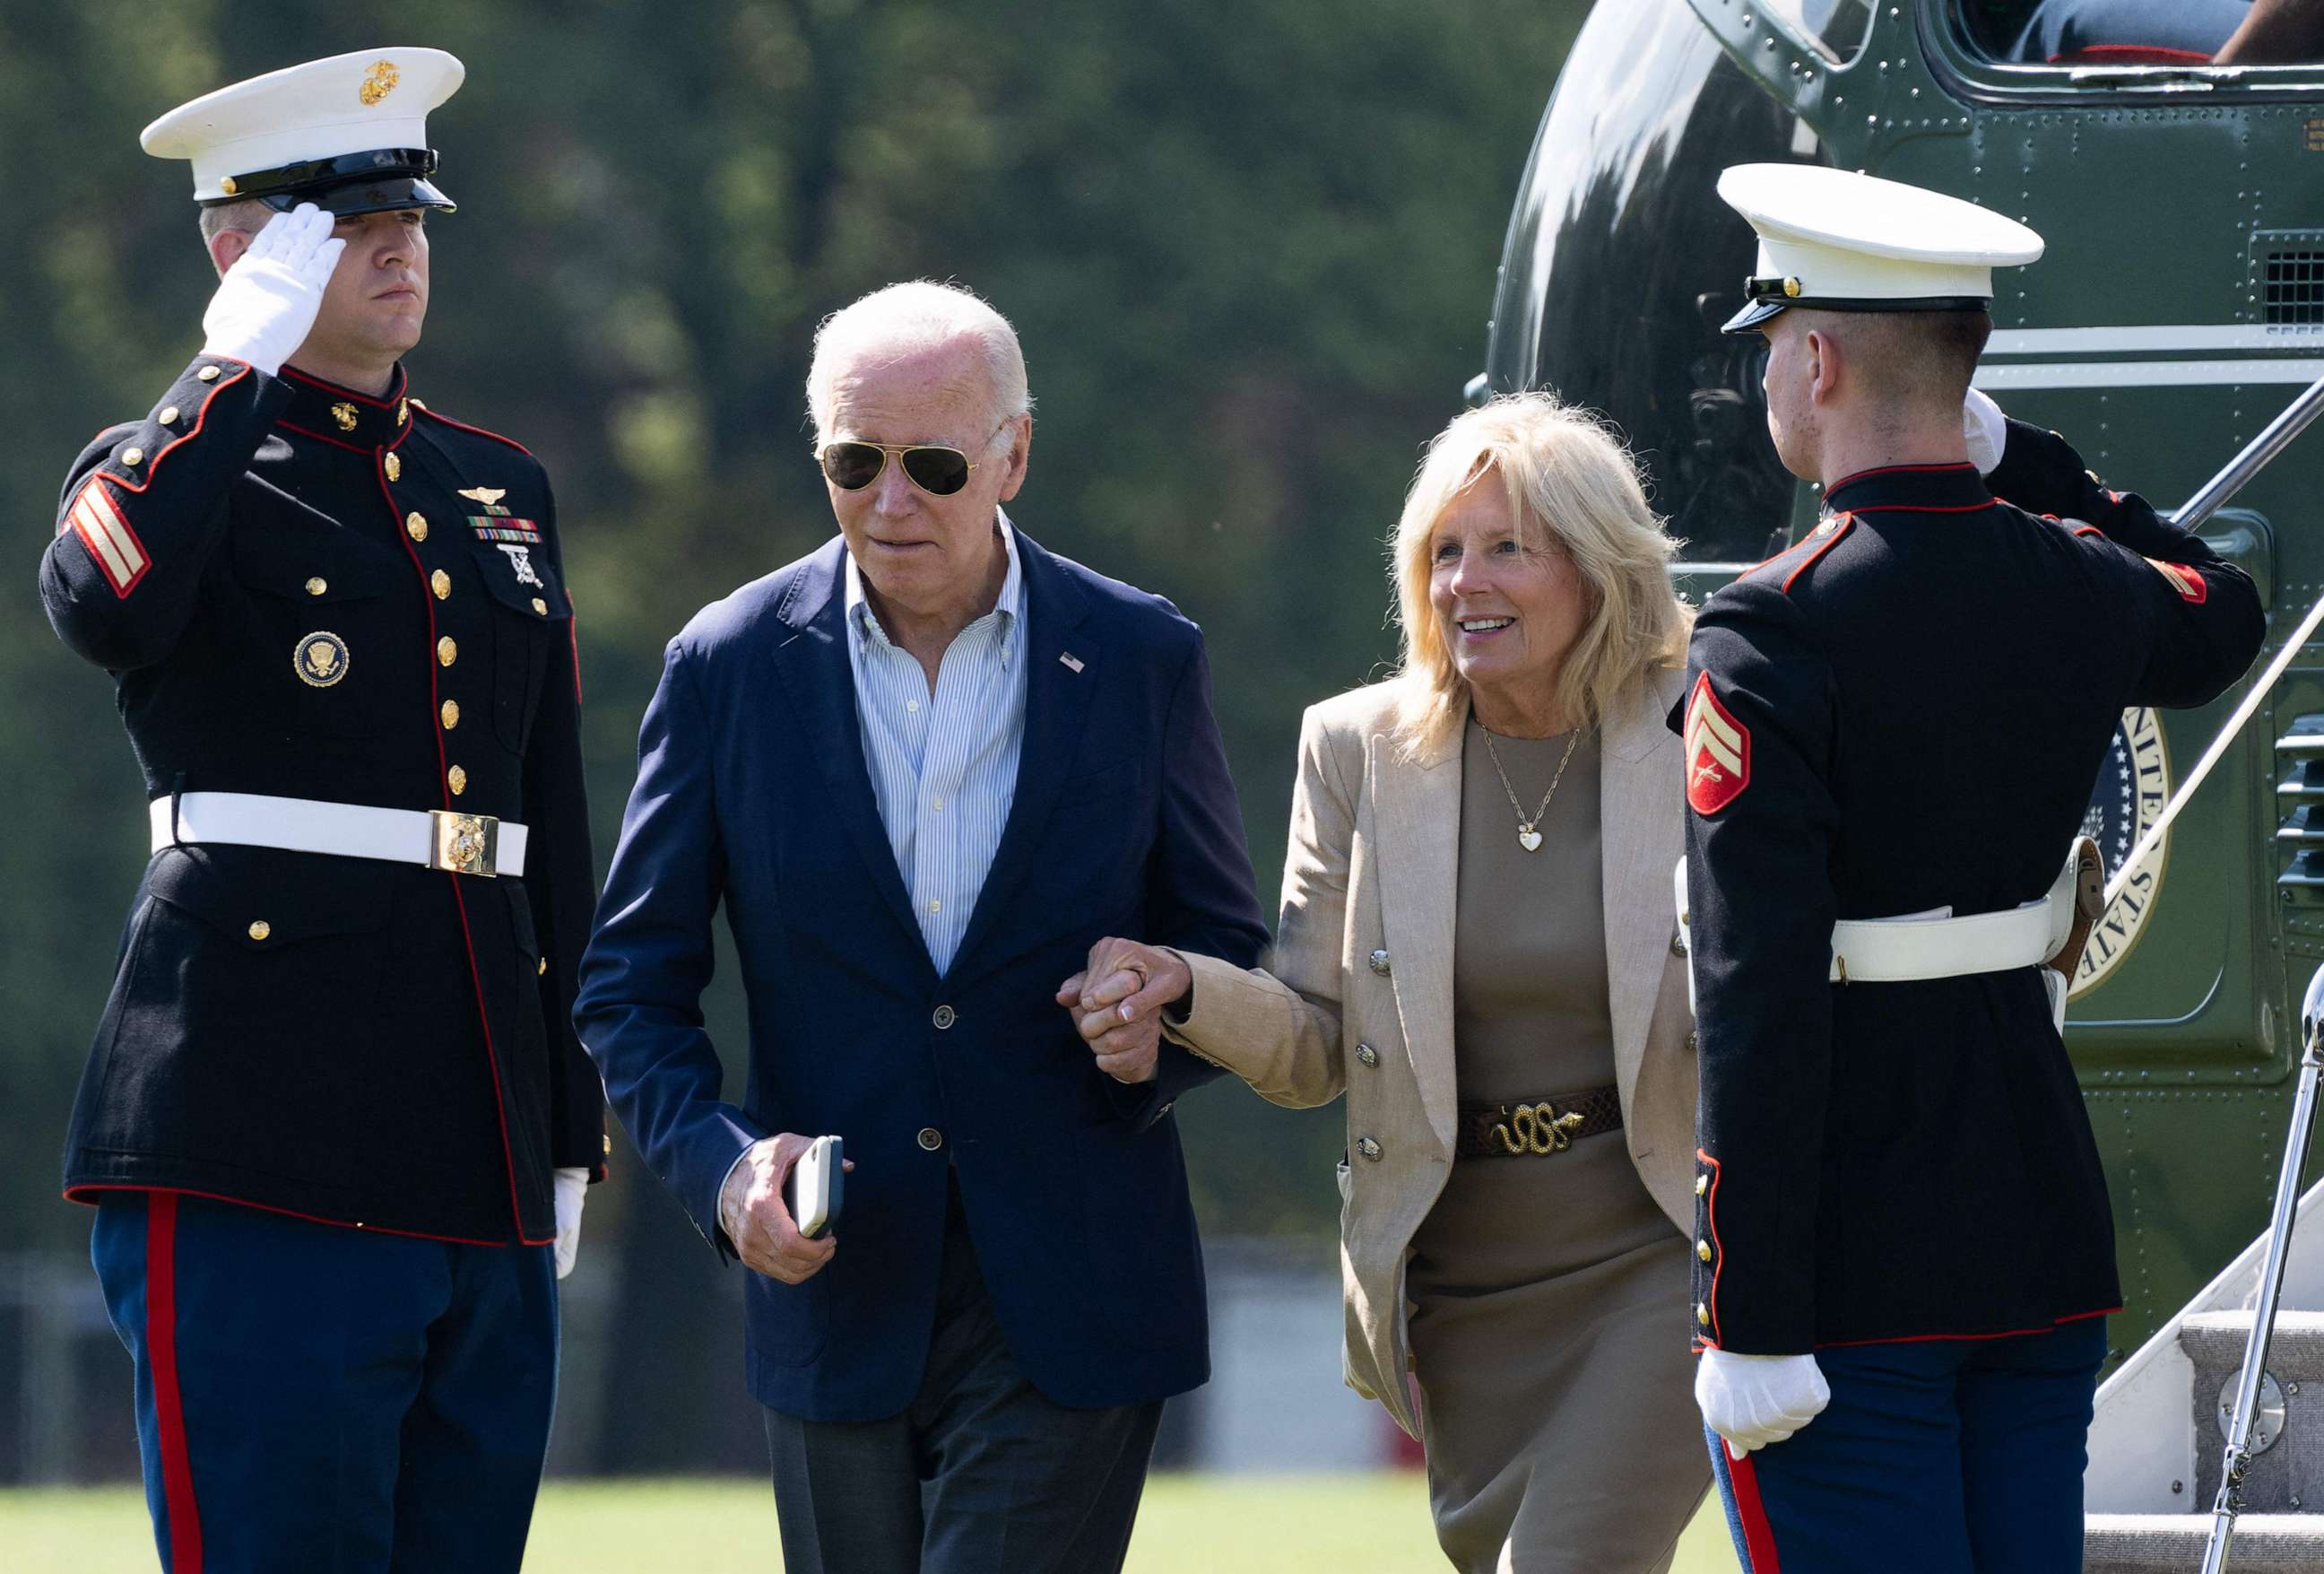 PHOTO: President Joe Biden and First Lady Jill Biden disembark from Marine One upon arrival at Fort McNair in Washington, D.C., July 4, 2023.